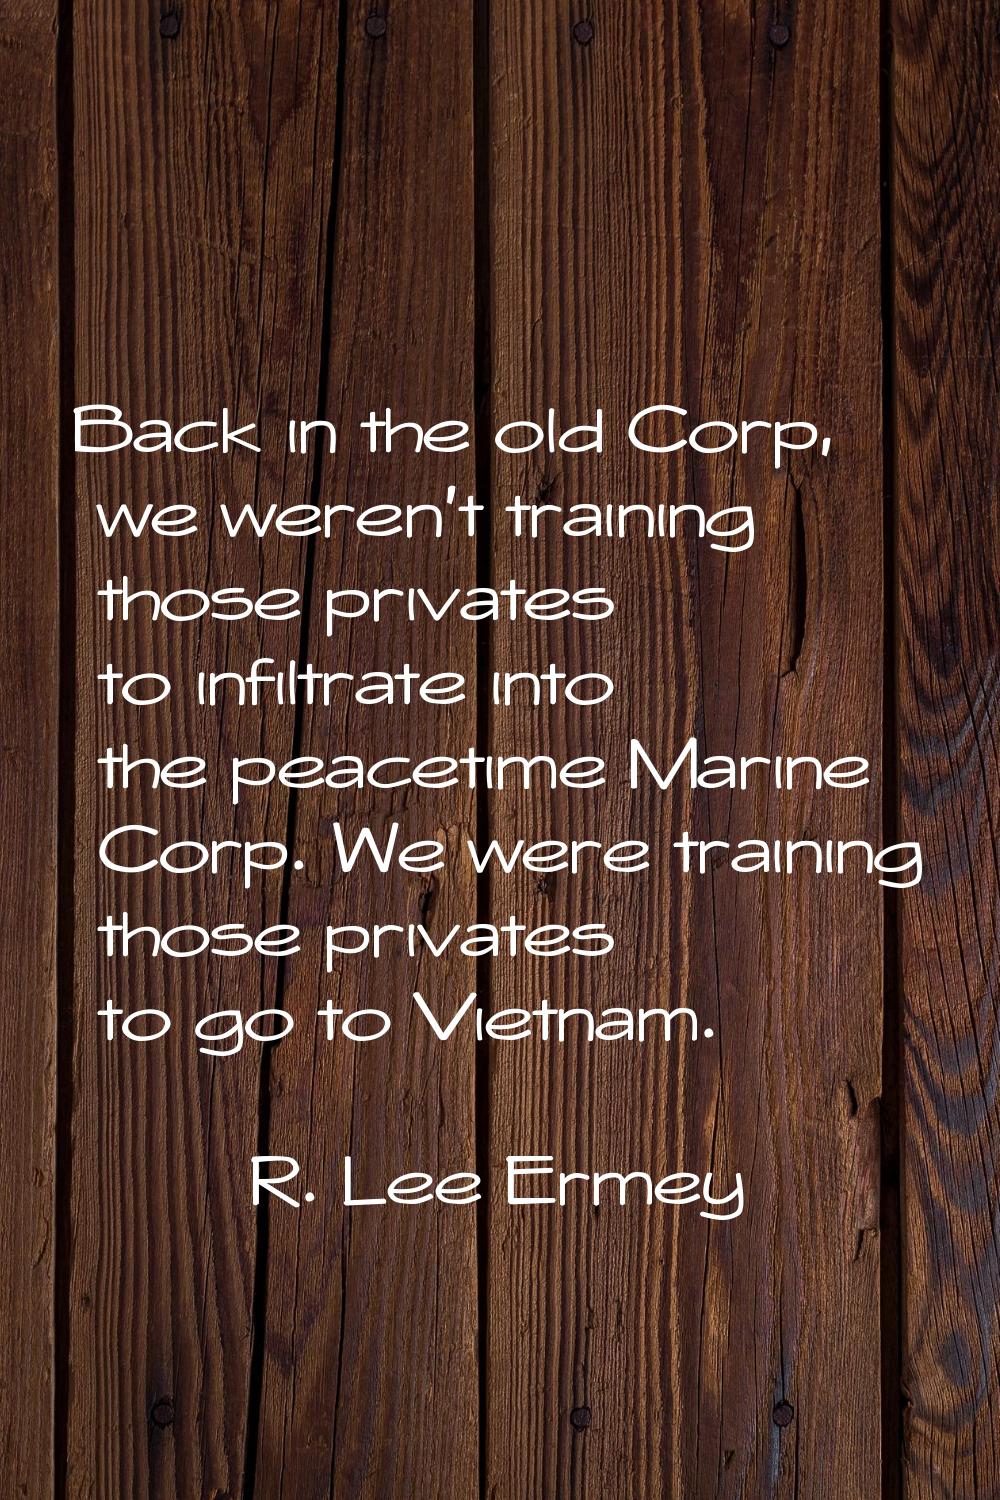 Back in the old Corp, we weren't training those privates to infiltrate into the peacetime Marine Co